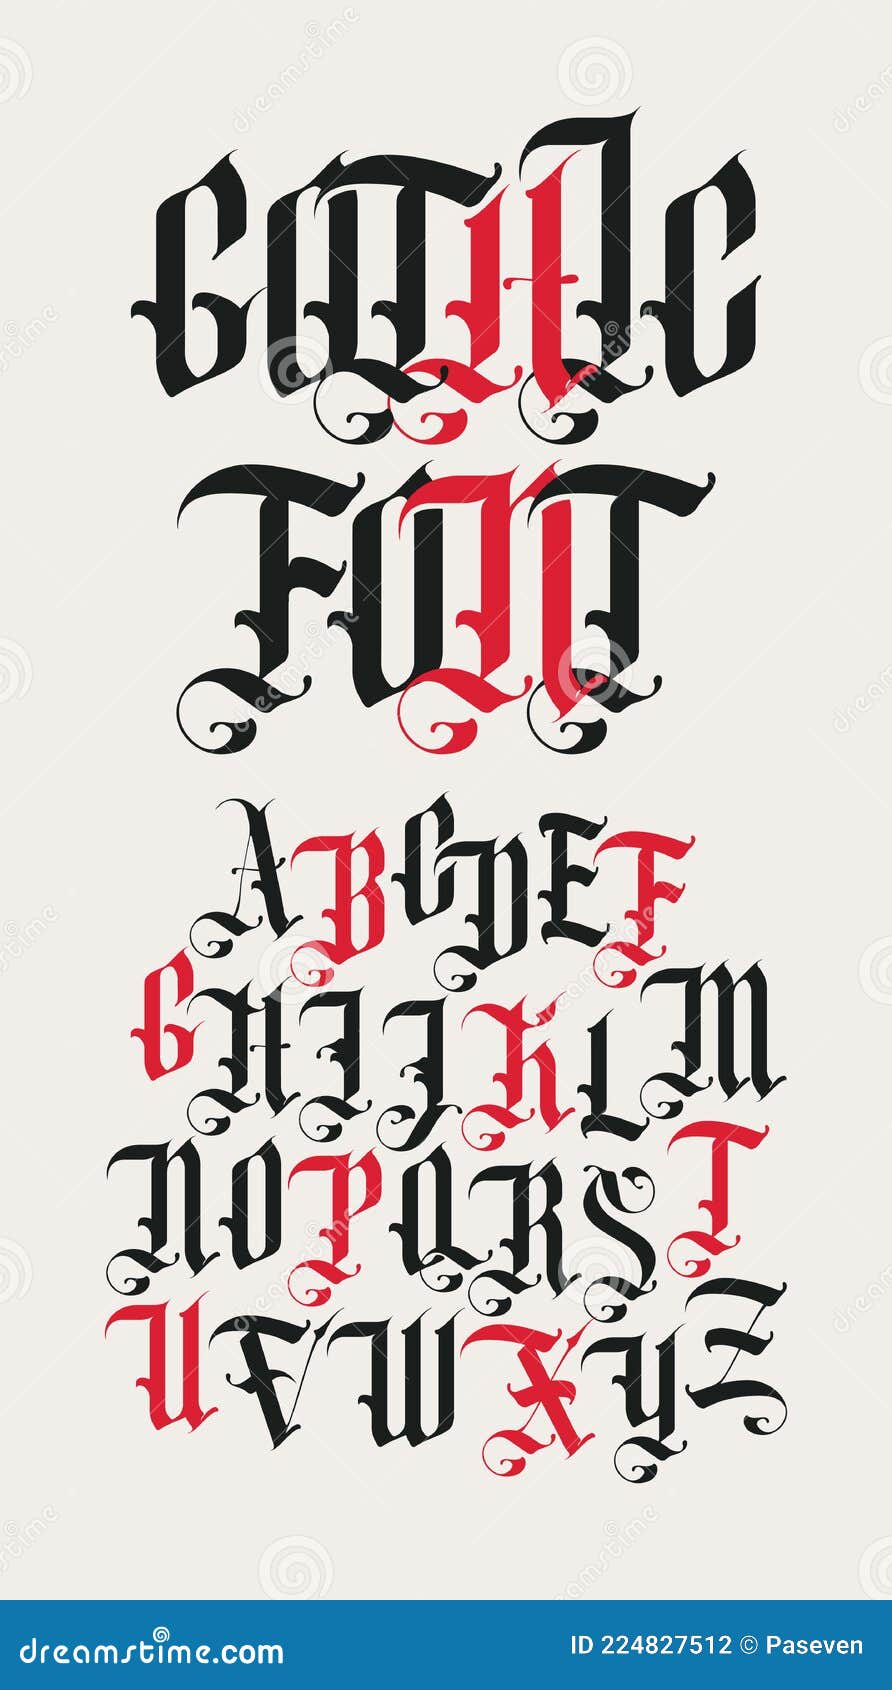 https://thumbs.dreamstime.com/z/gothic-font-set-vintage-alphabet-letters-full-capital-english-style-medieval-latin-vector-calligraphy-lettering-224827512.jpg